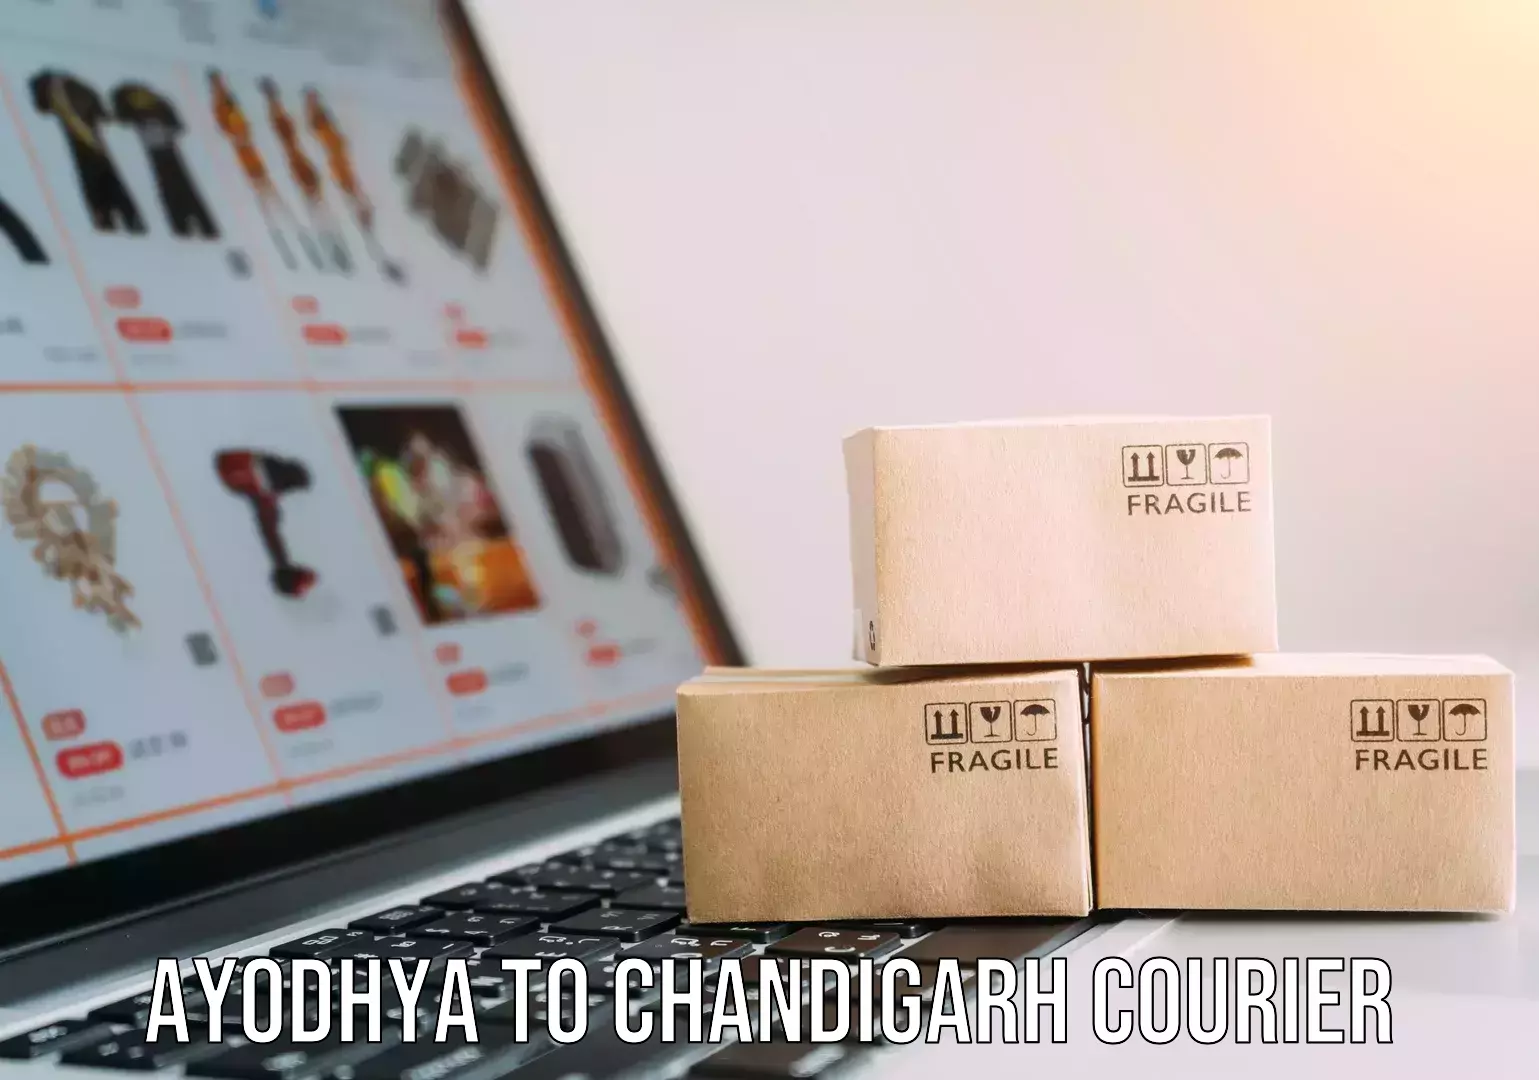 Courier service comparison Ayodhya to Chandigarh